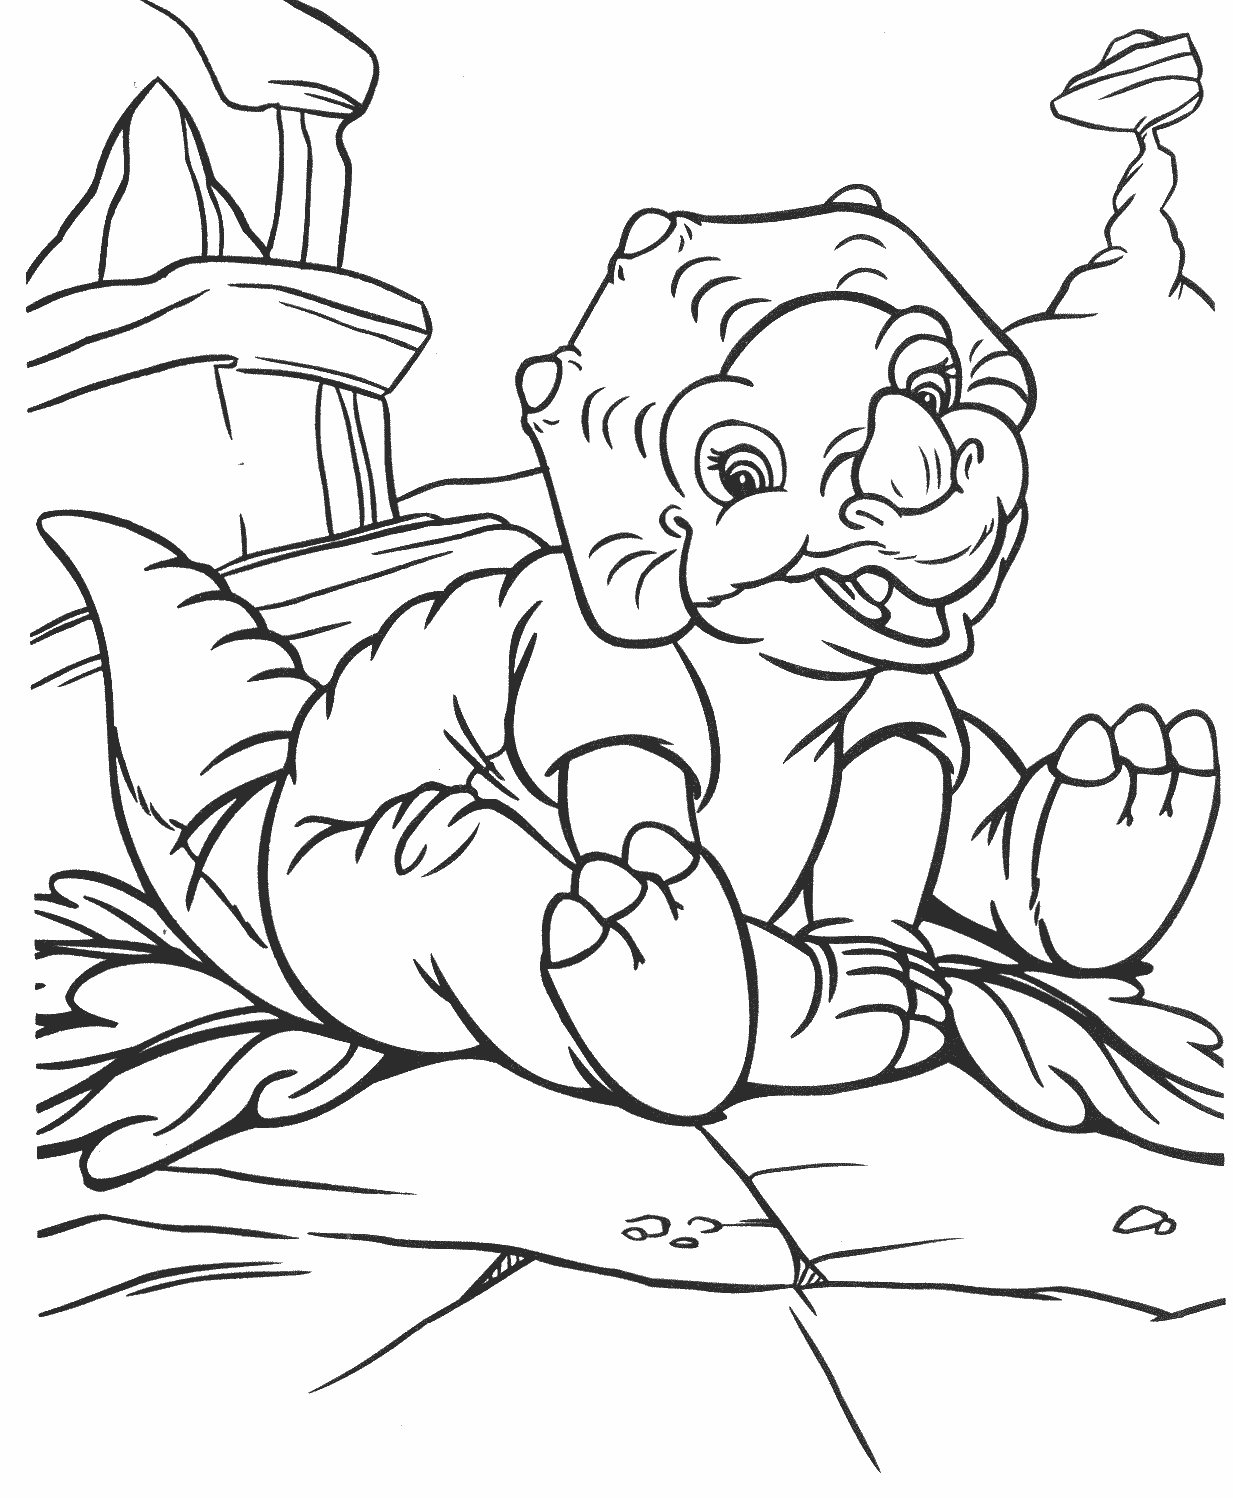 Dinosaur Lf4 Animals Coloring Pages